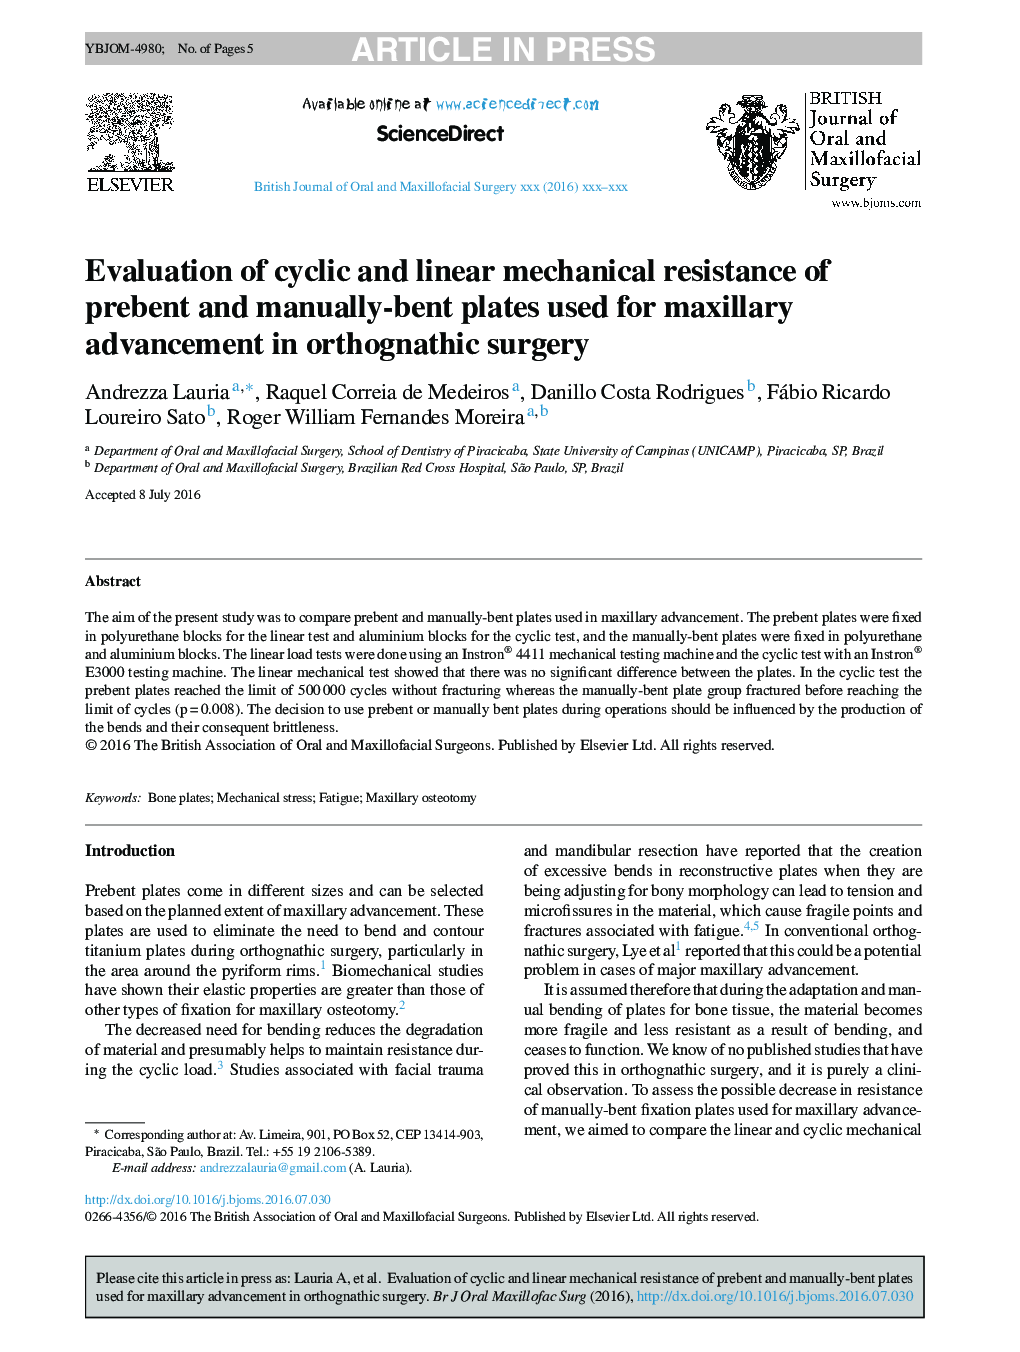 Evaluation of cyclic and linear mechanical resistance of prebent and manually-bent plates used for maxillary advancement in orthognathic surgery